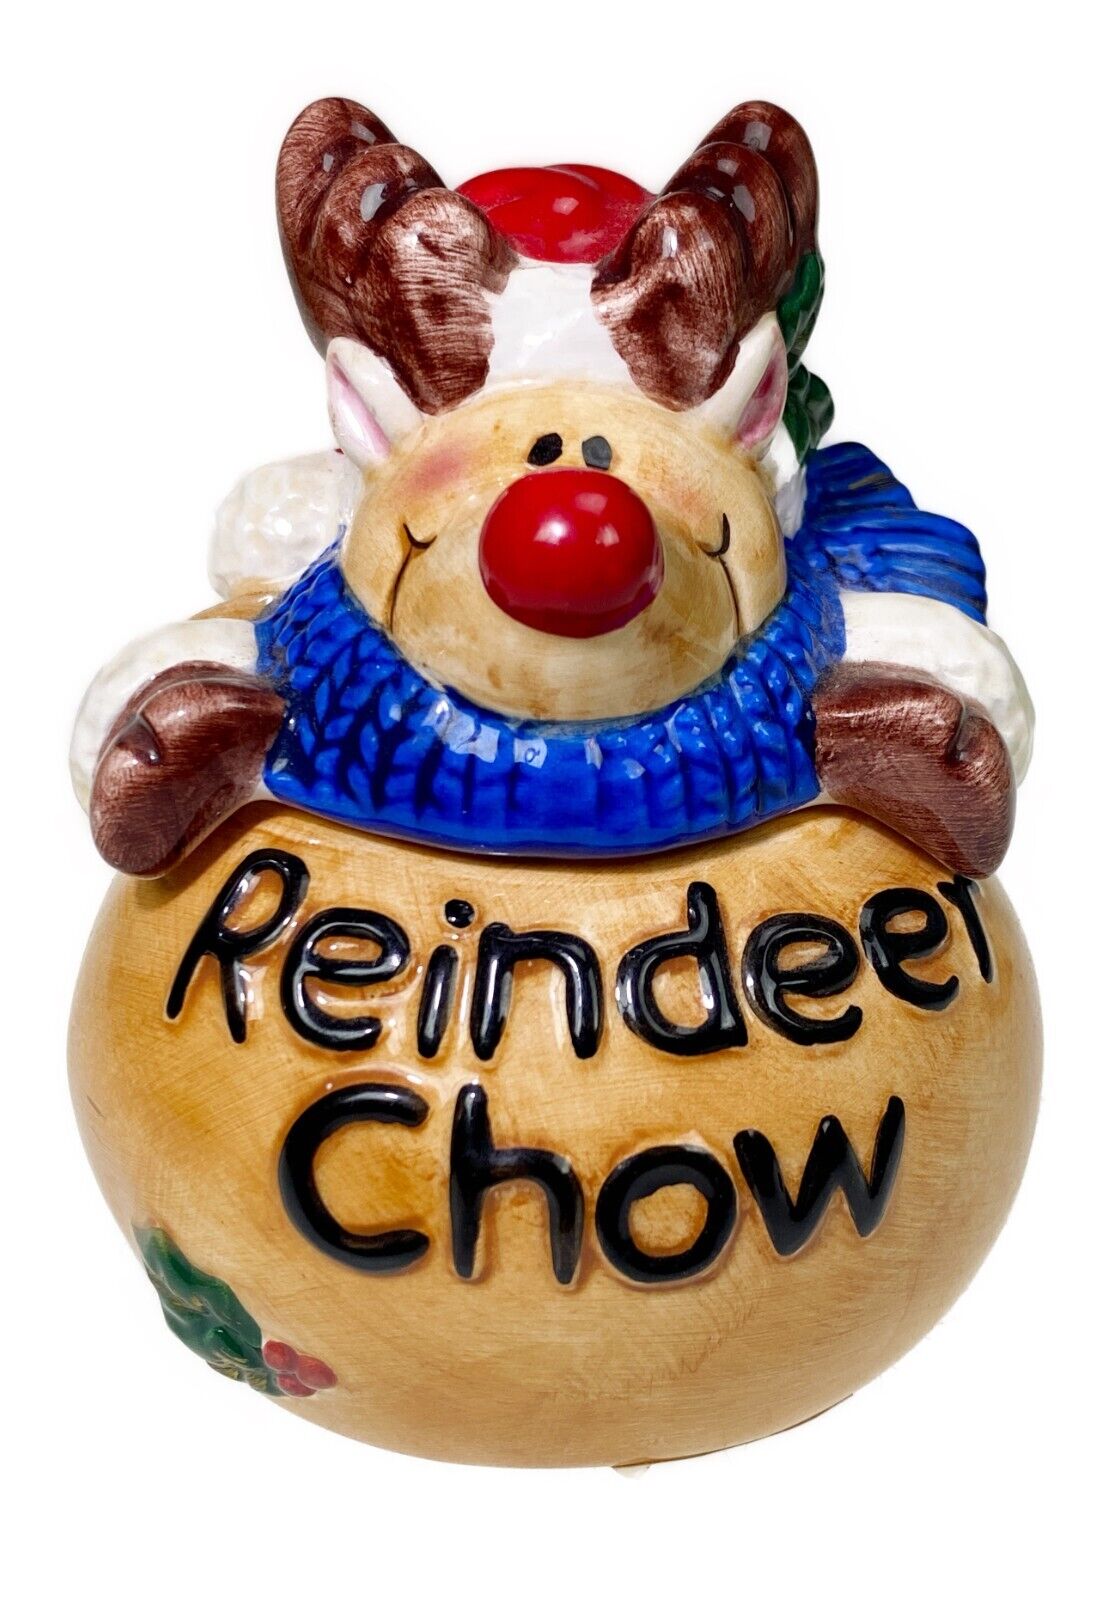 4.5” Reindeer Chow Food Ceramic Dish Container Christmas Holiday Figurine 2 Pc